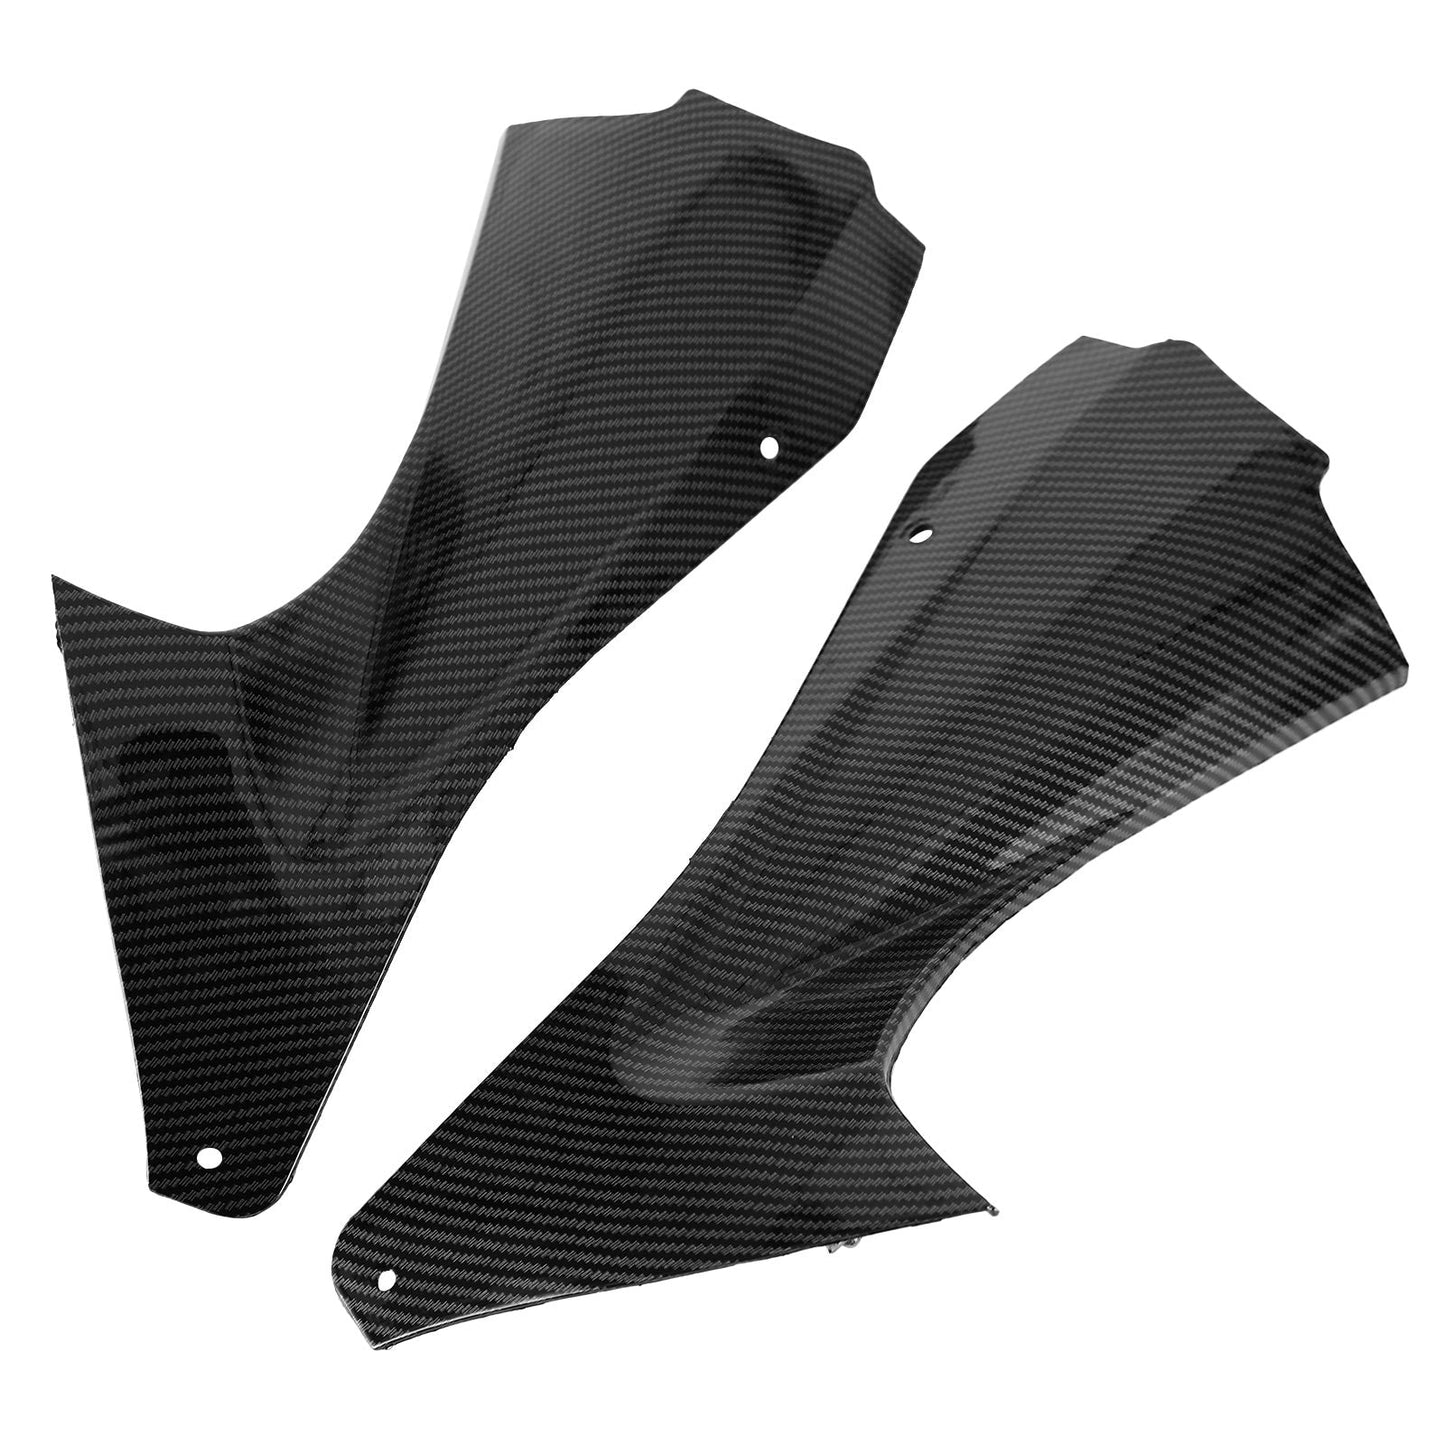 Gas Fuel Tank Side Cover Fairing Panel Cowl Trim for Yamaha YZF R6 2006-2007 Carbon